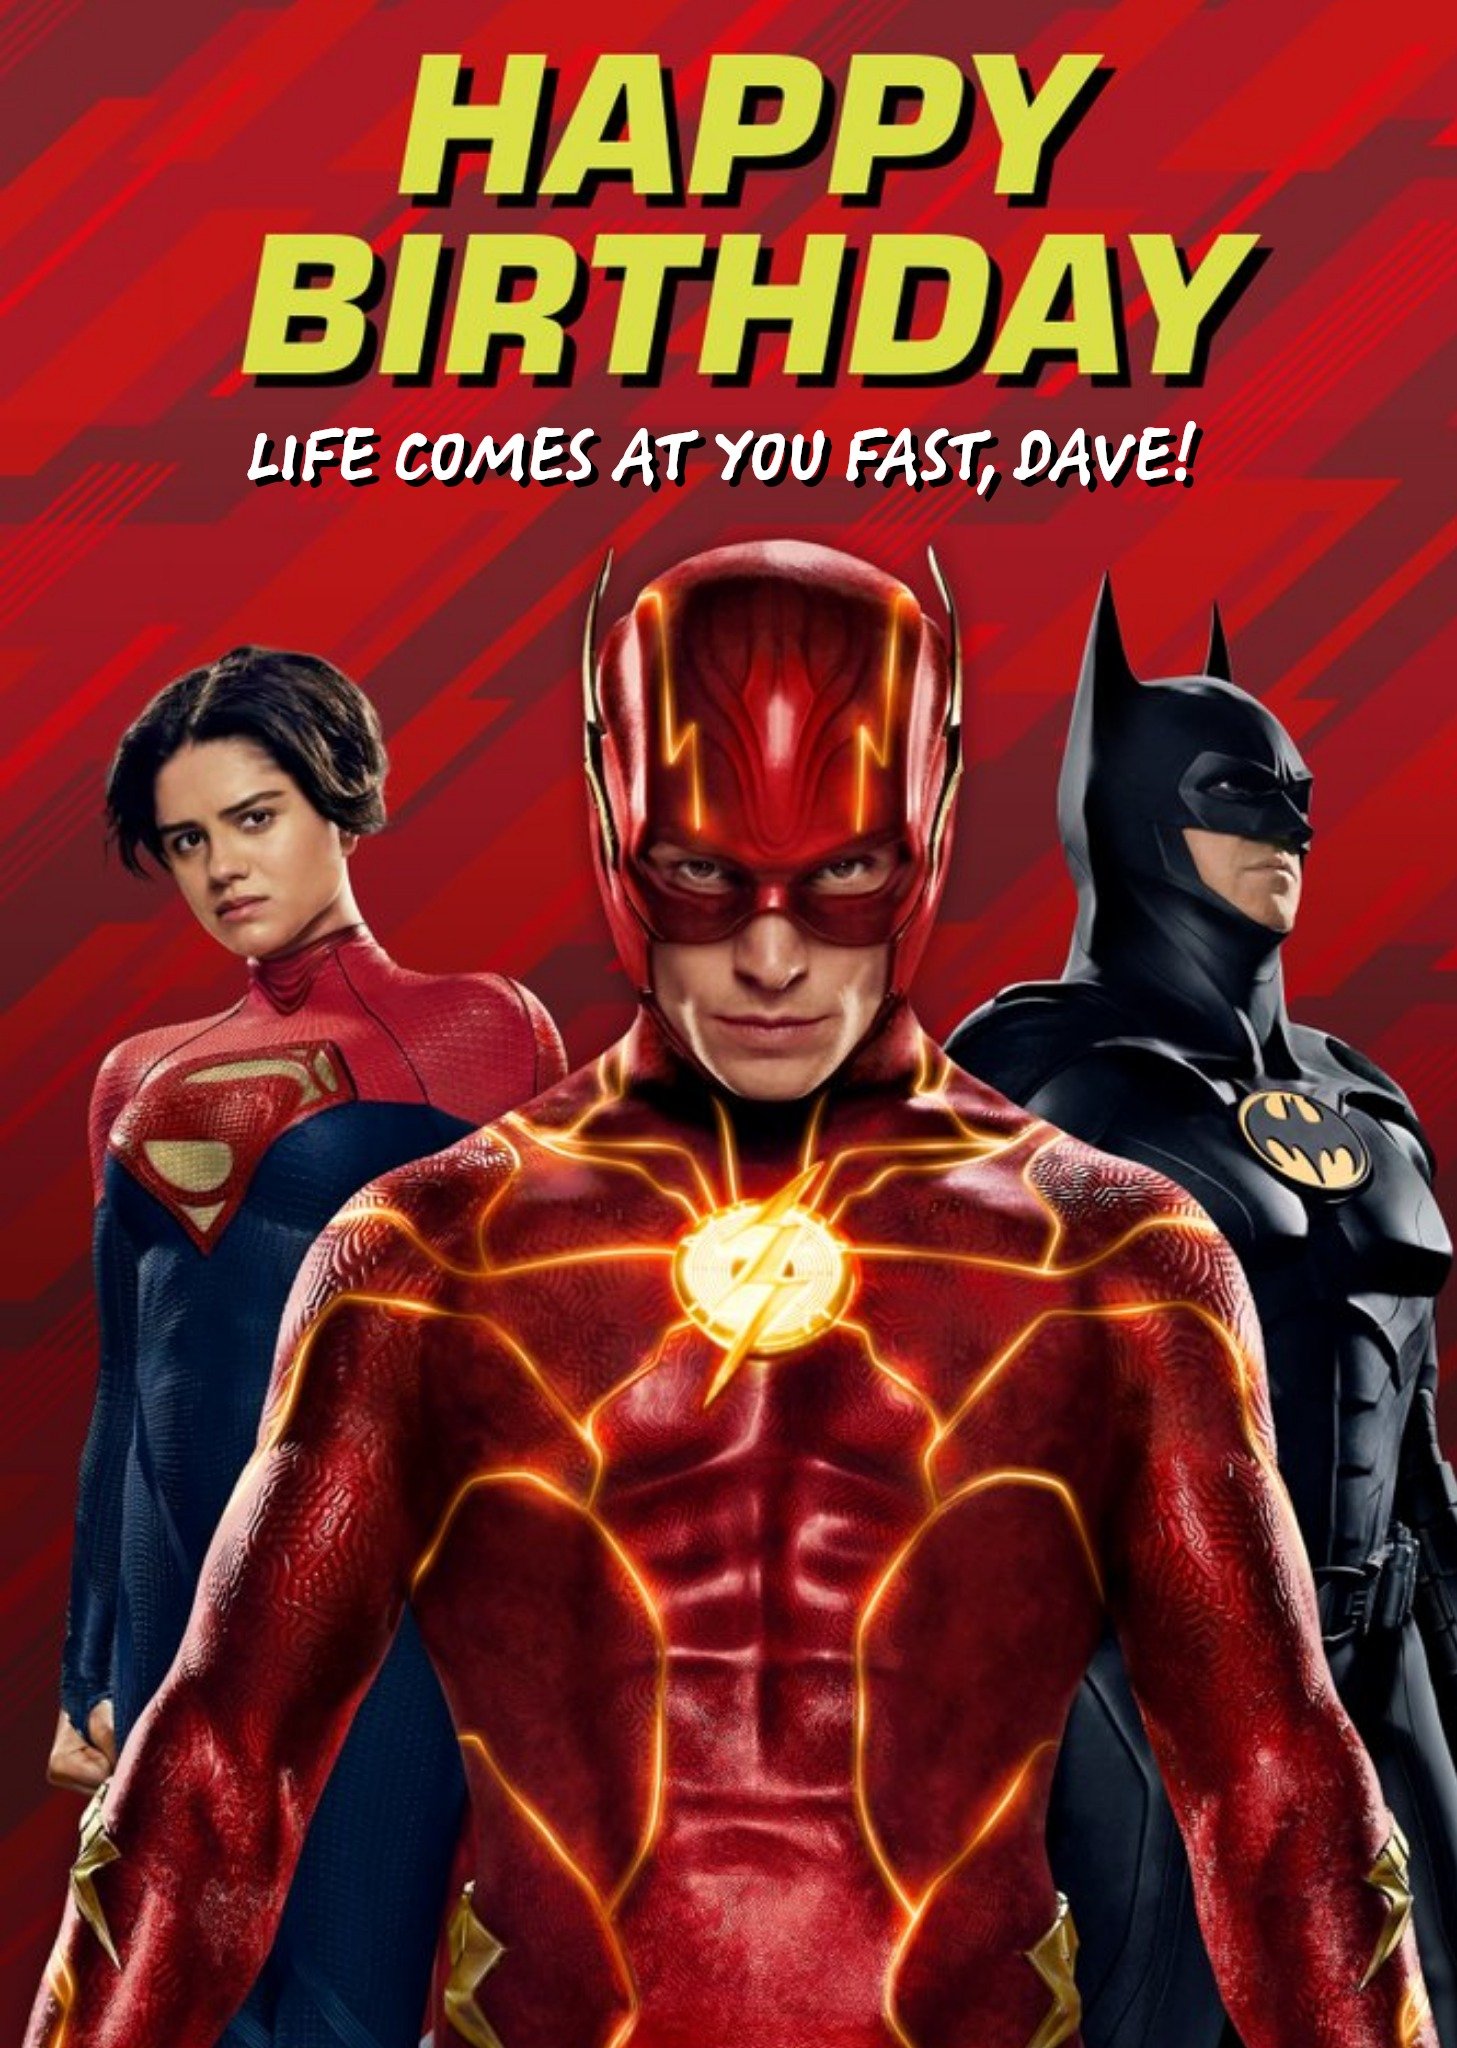 The Flash Movie With Batman And Supergirl Warner Brothers Birthday Card Ecard